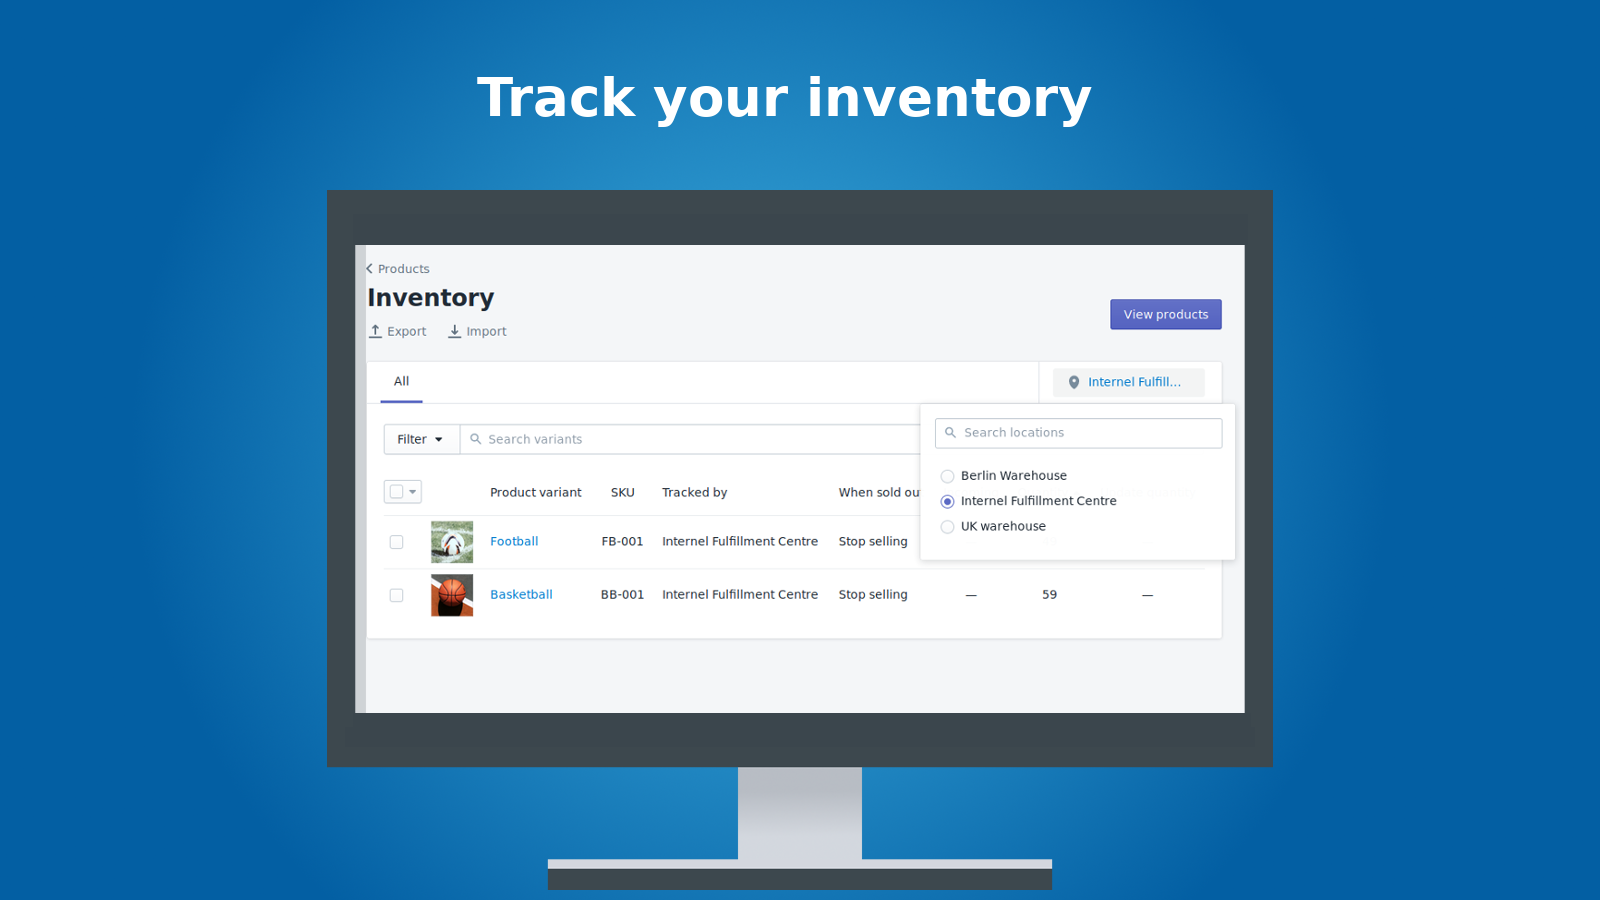 Track your inventory